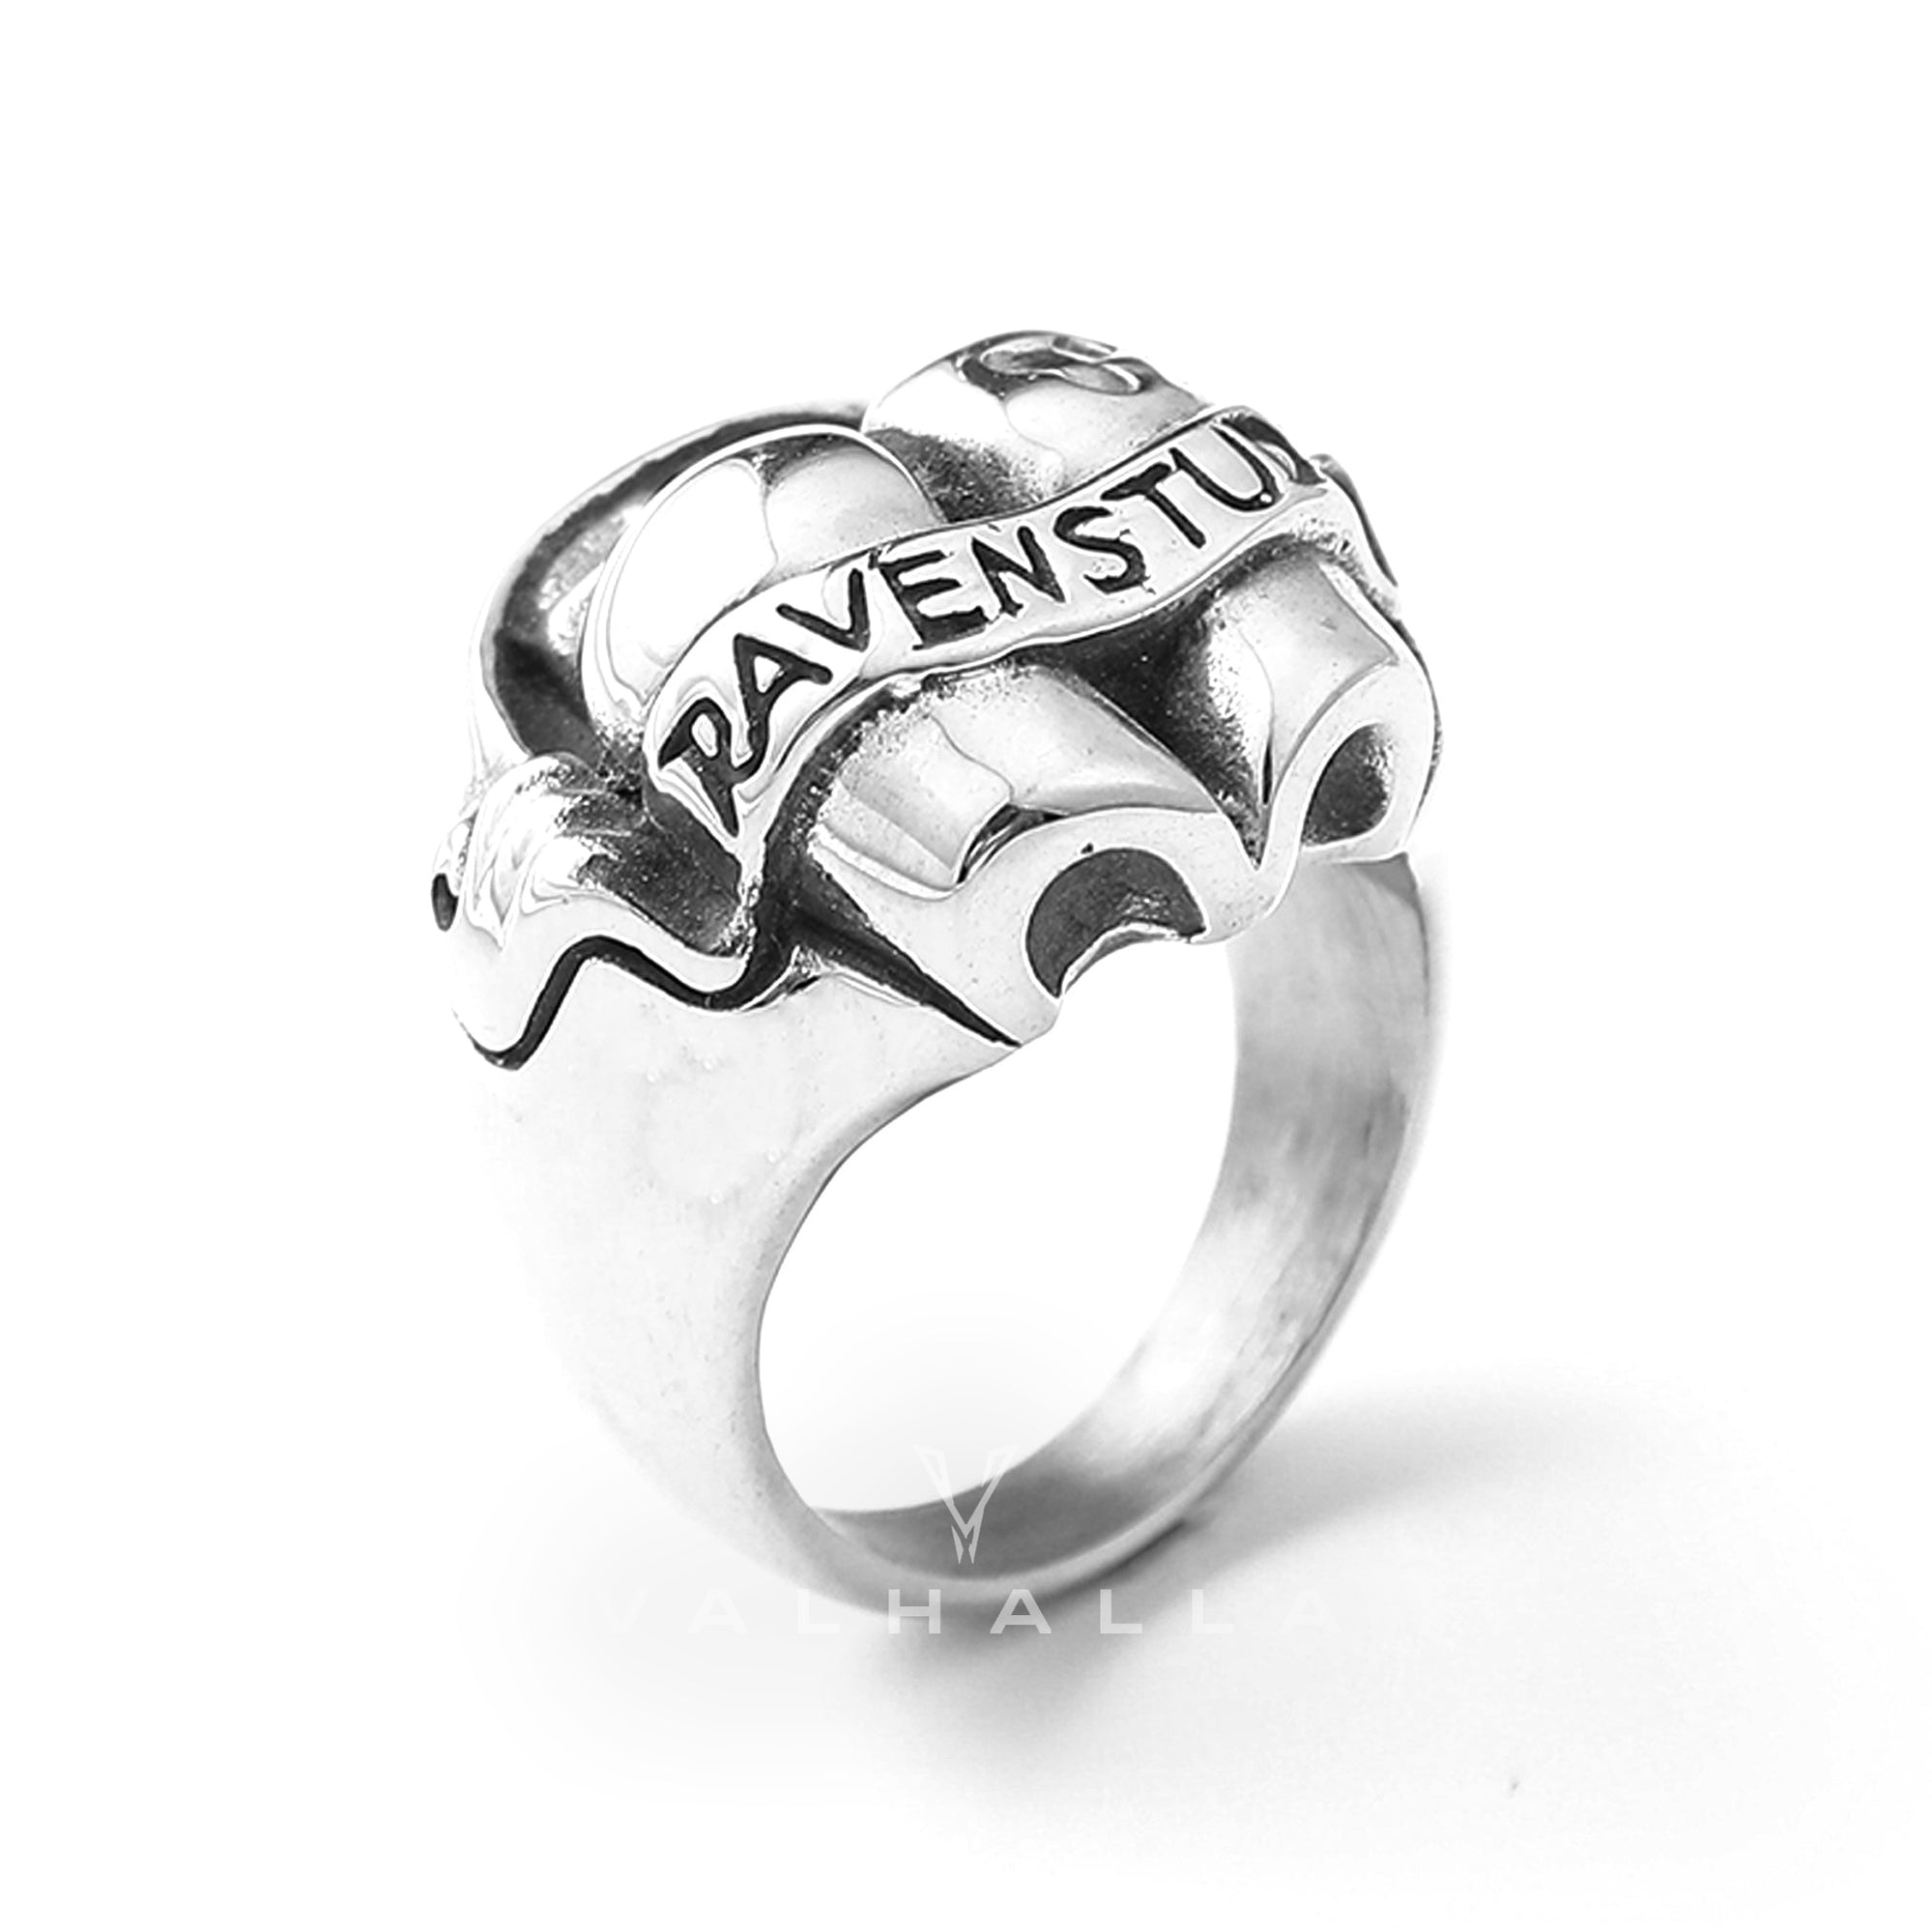 Butt Shaped Stainless Steel Ring